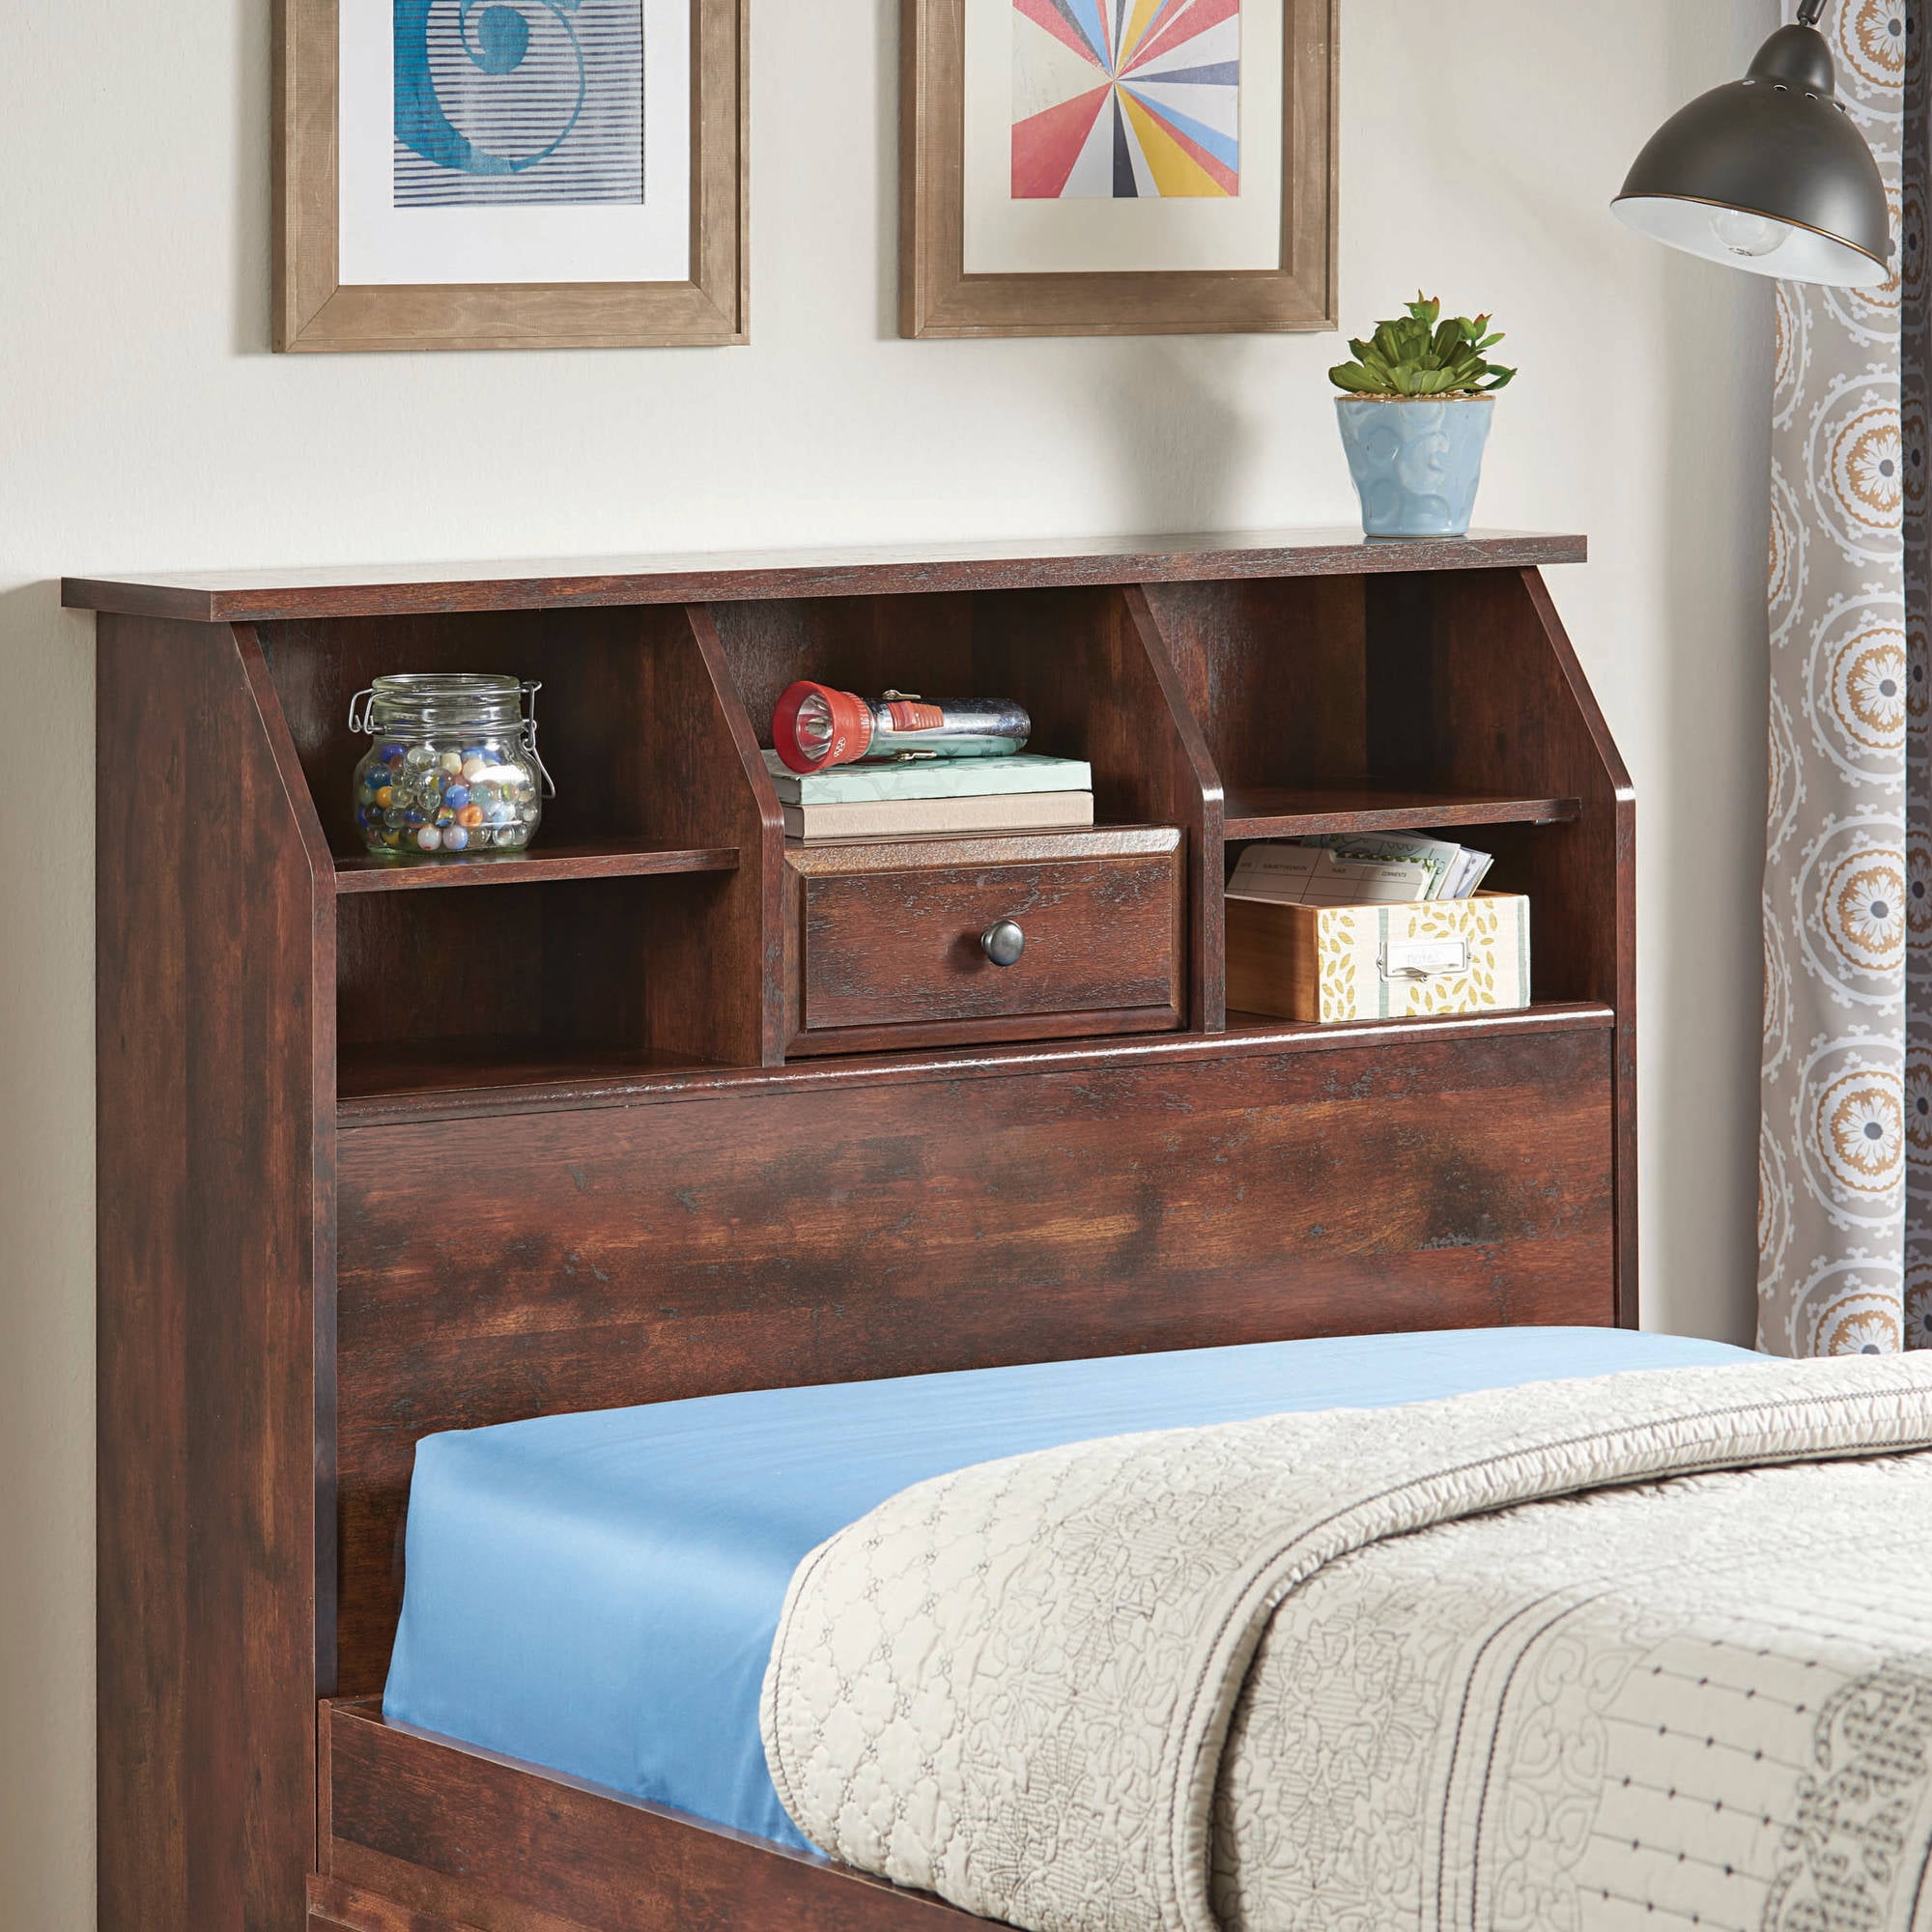 New Twin Bed With Bookcase Headboard for Large Space